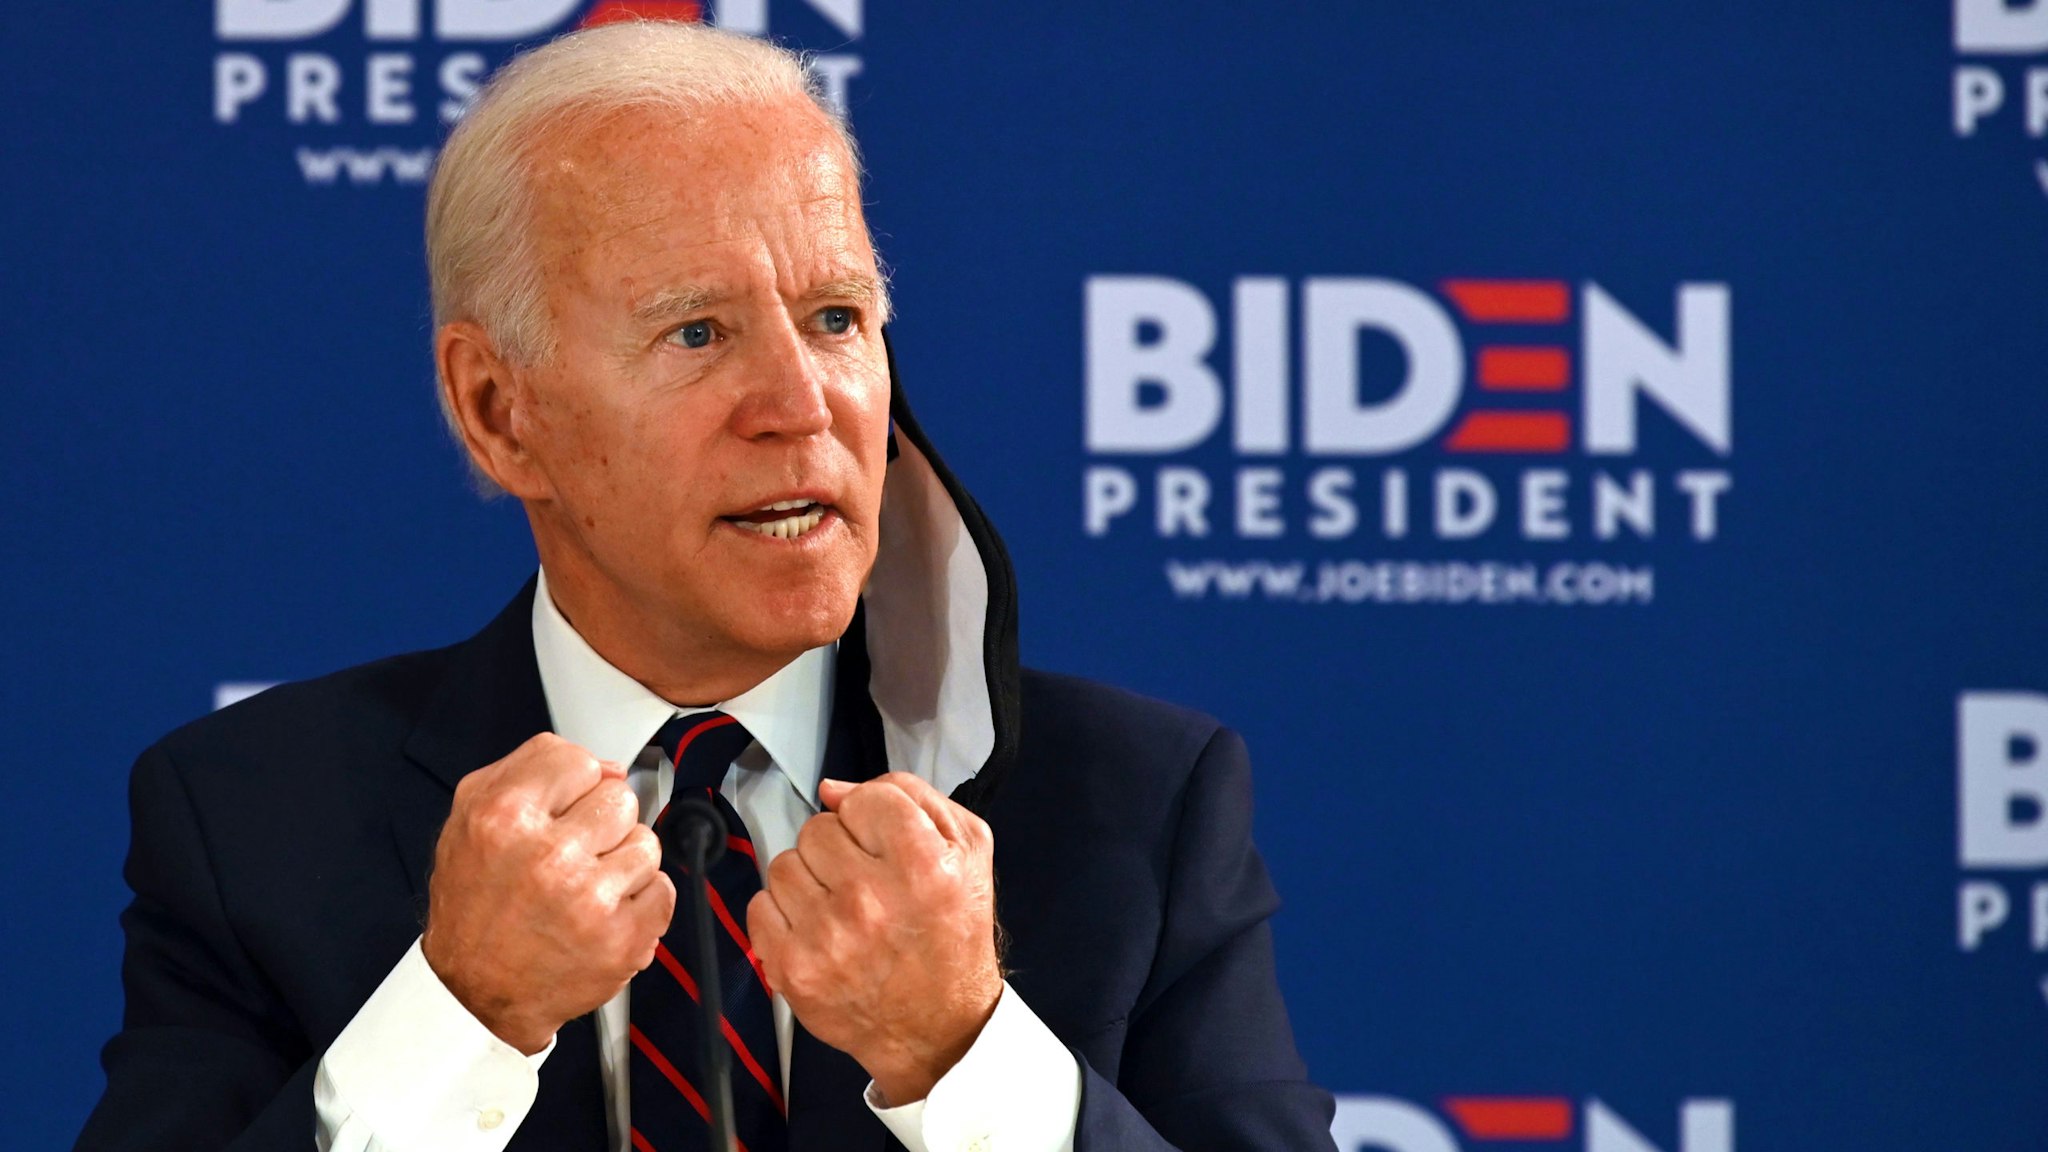 Democratic presidential candidate Joe Biden holds a roundtable meeting on reopening the economy with community leaders at the Enterprise Center in Philadelphia, Pennsylvania, on June 11, 2020.